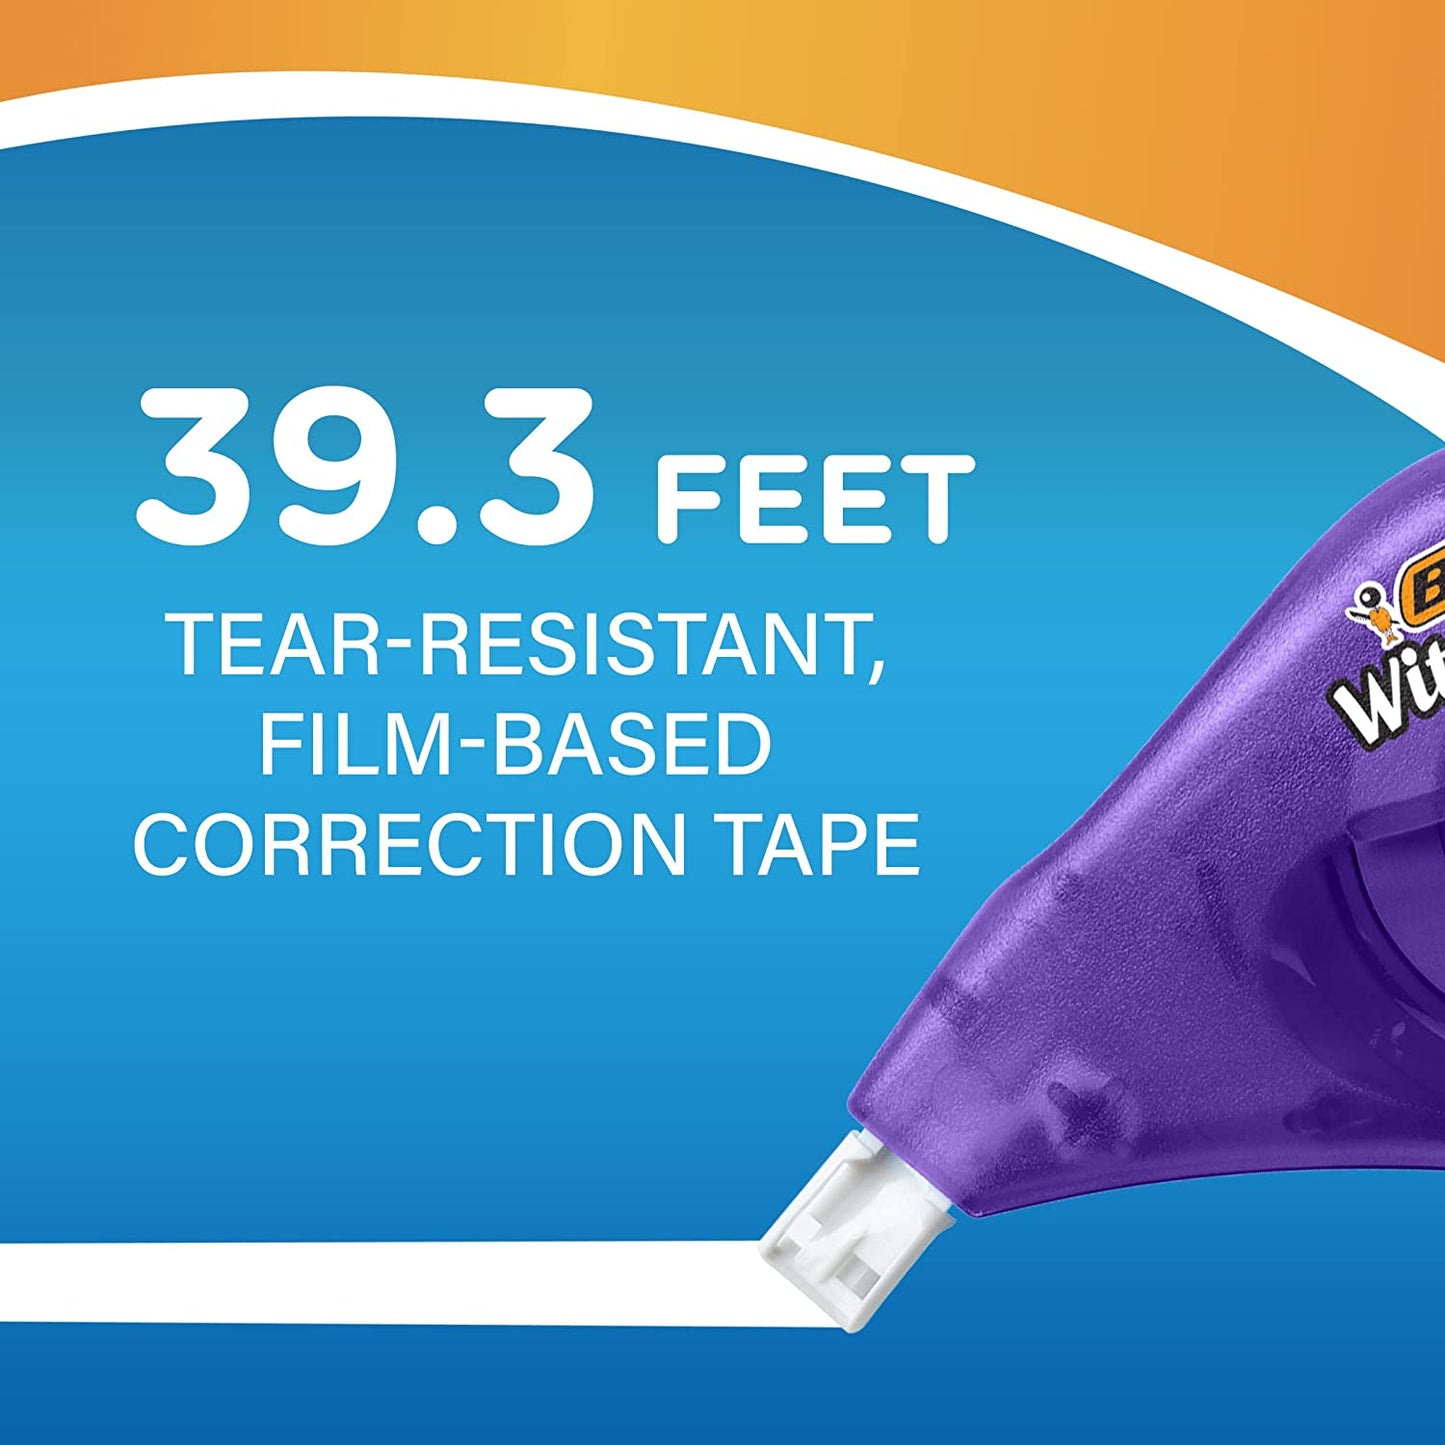 White-Out Brand EZ Correct Correction Tape, 39.3 Feet, 4-Count Pack of White Correction Tape, Fast, Clean and Easy to Use Tear-Resistant Tape